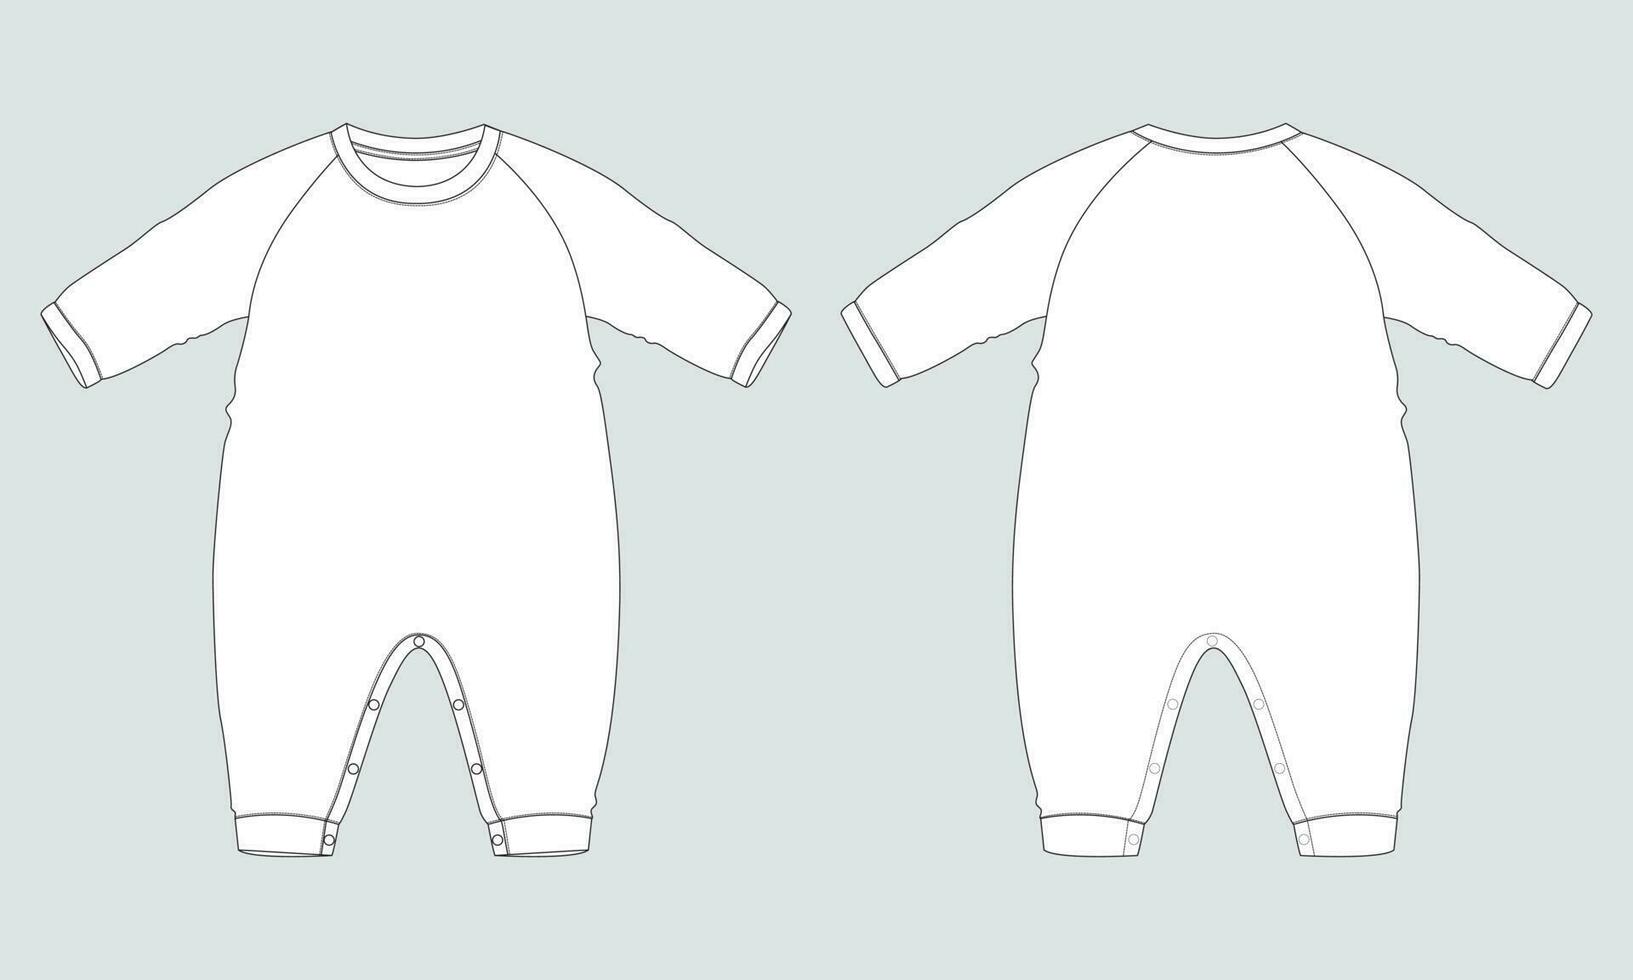 Long sleeve romper bodysuit technical drawing fashion flat sketch vector illustration template for kids.